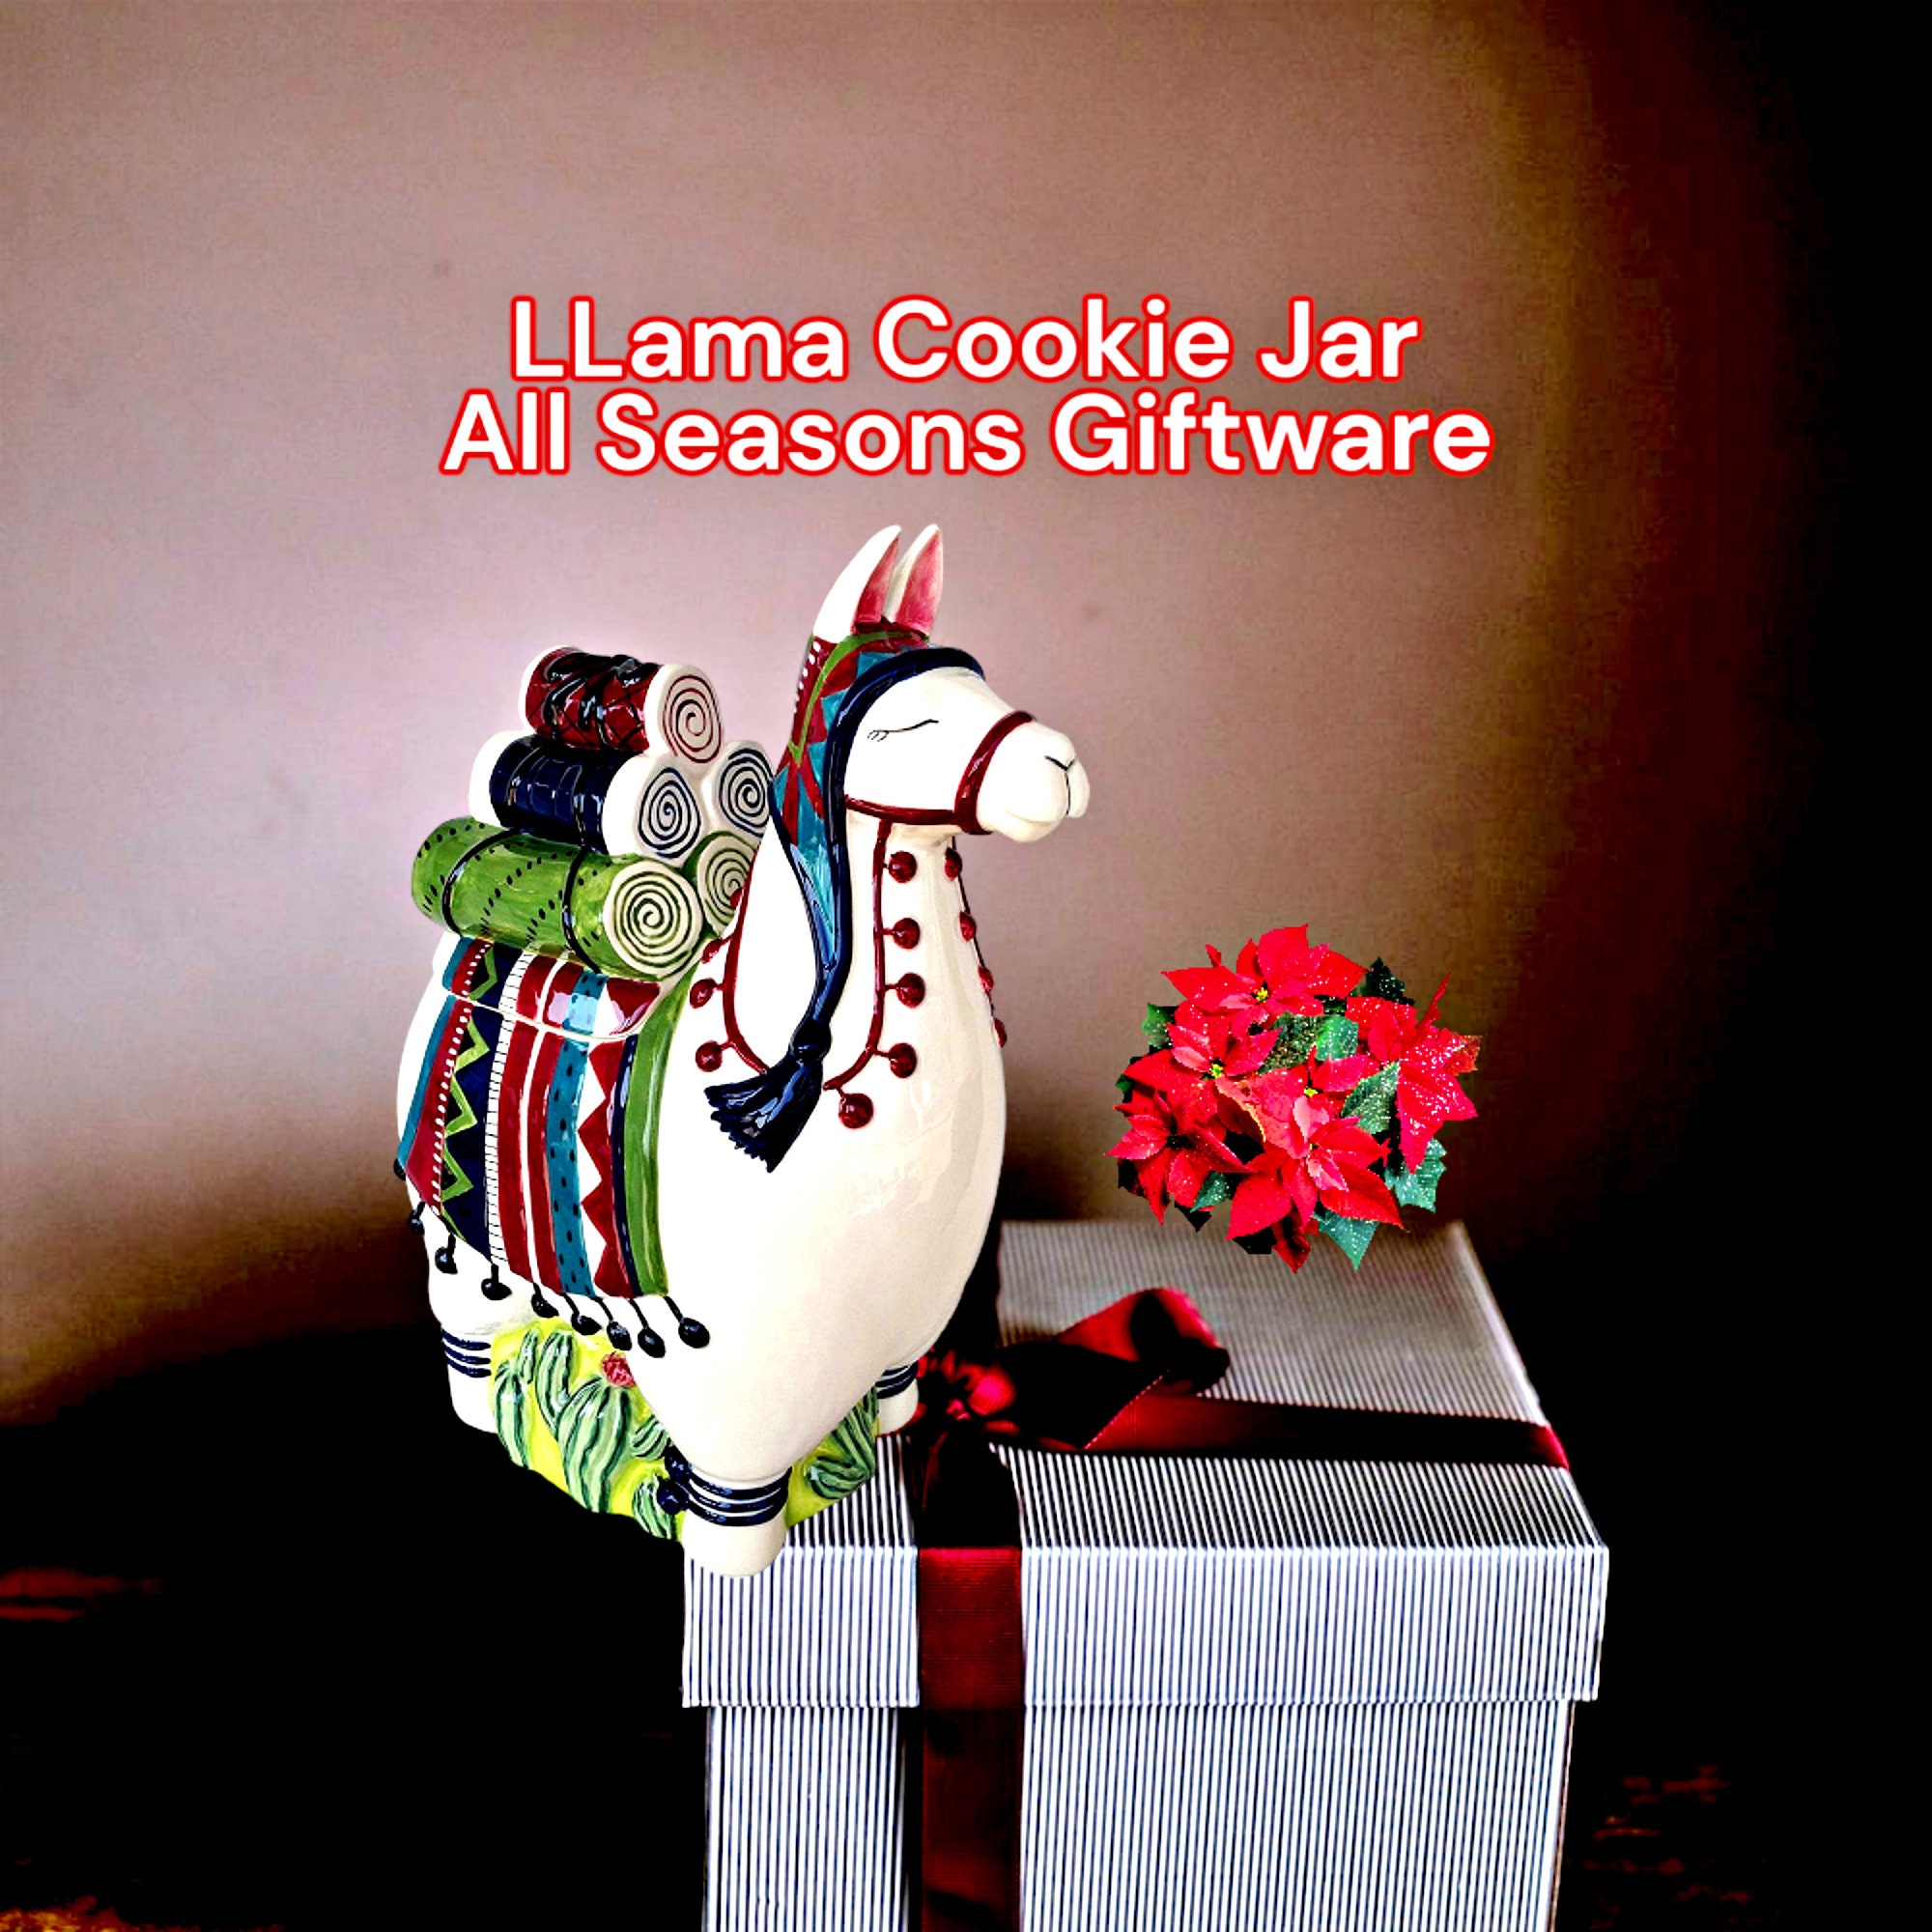 Unique Ceramic Cookie Jar LLama Biscotti Jar For All Year Round Kitchen Storage Canister With Lid